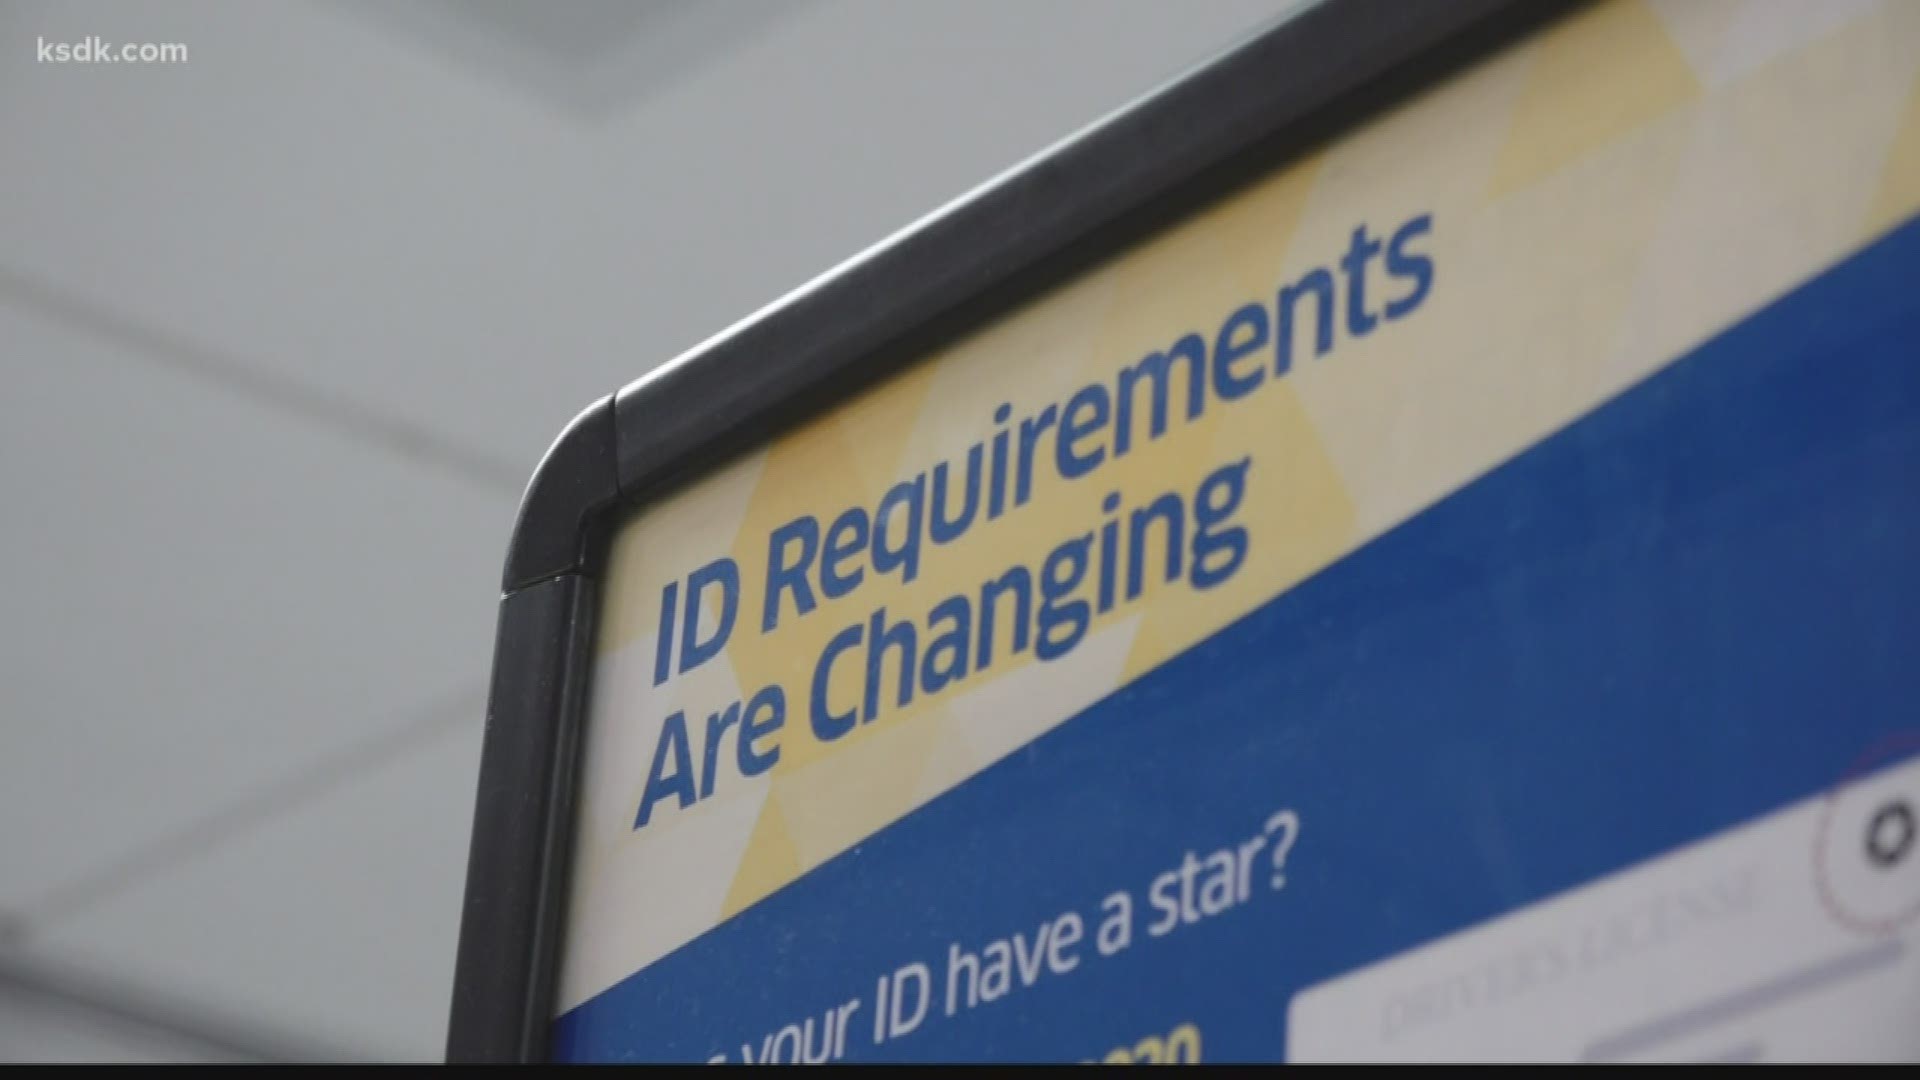 Real Id Begins In Missouri Illinois In 2020 Whas11 Com